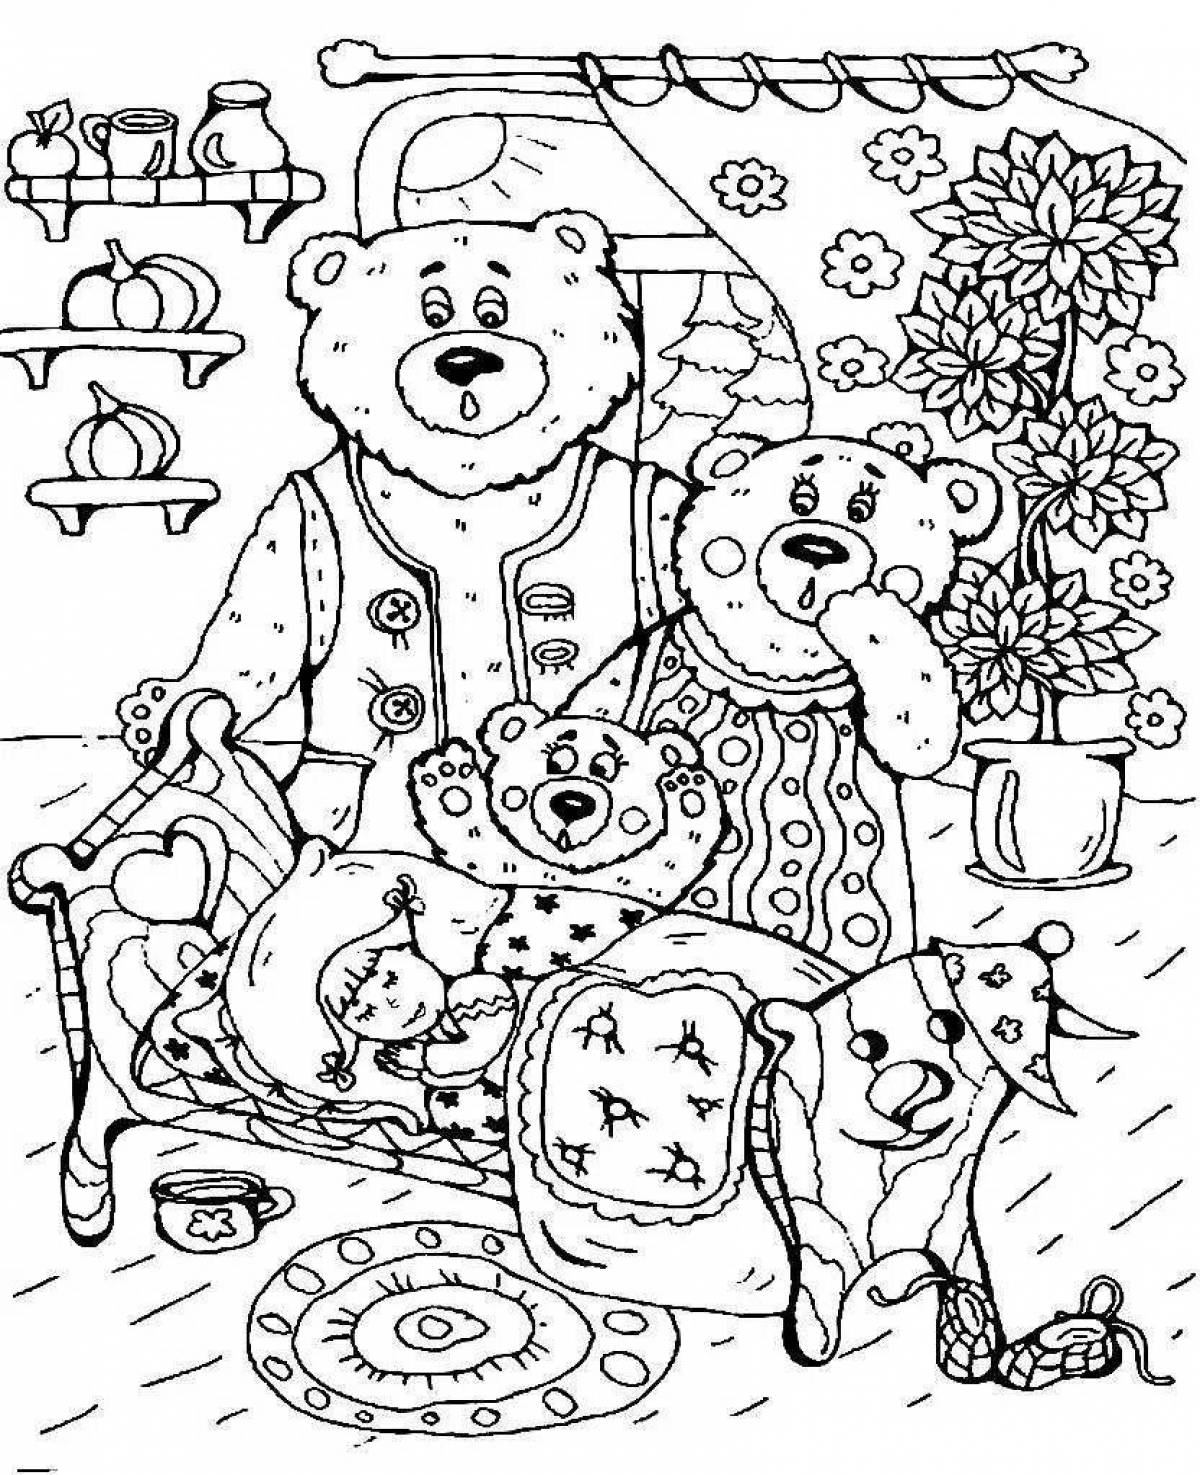 Three funny bears coloring page